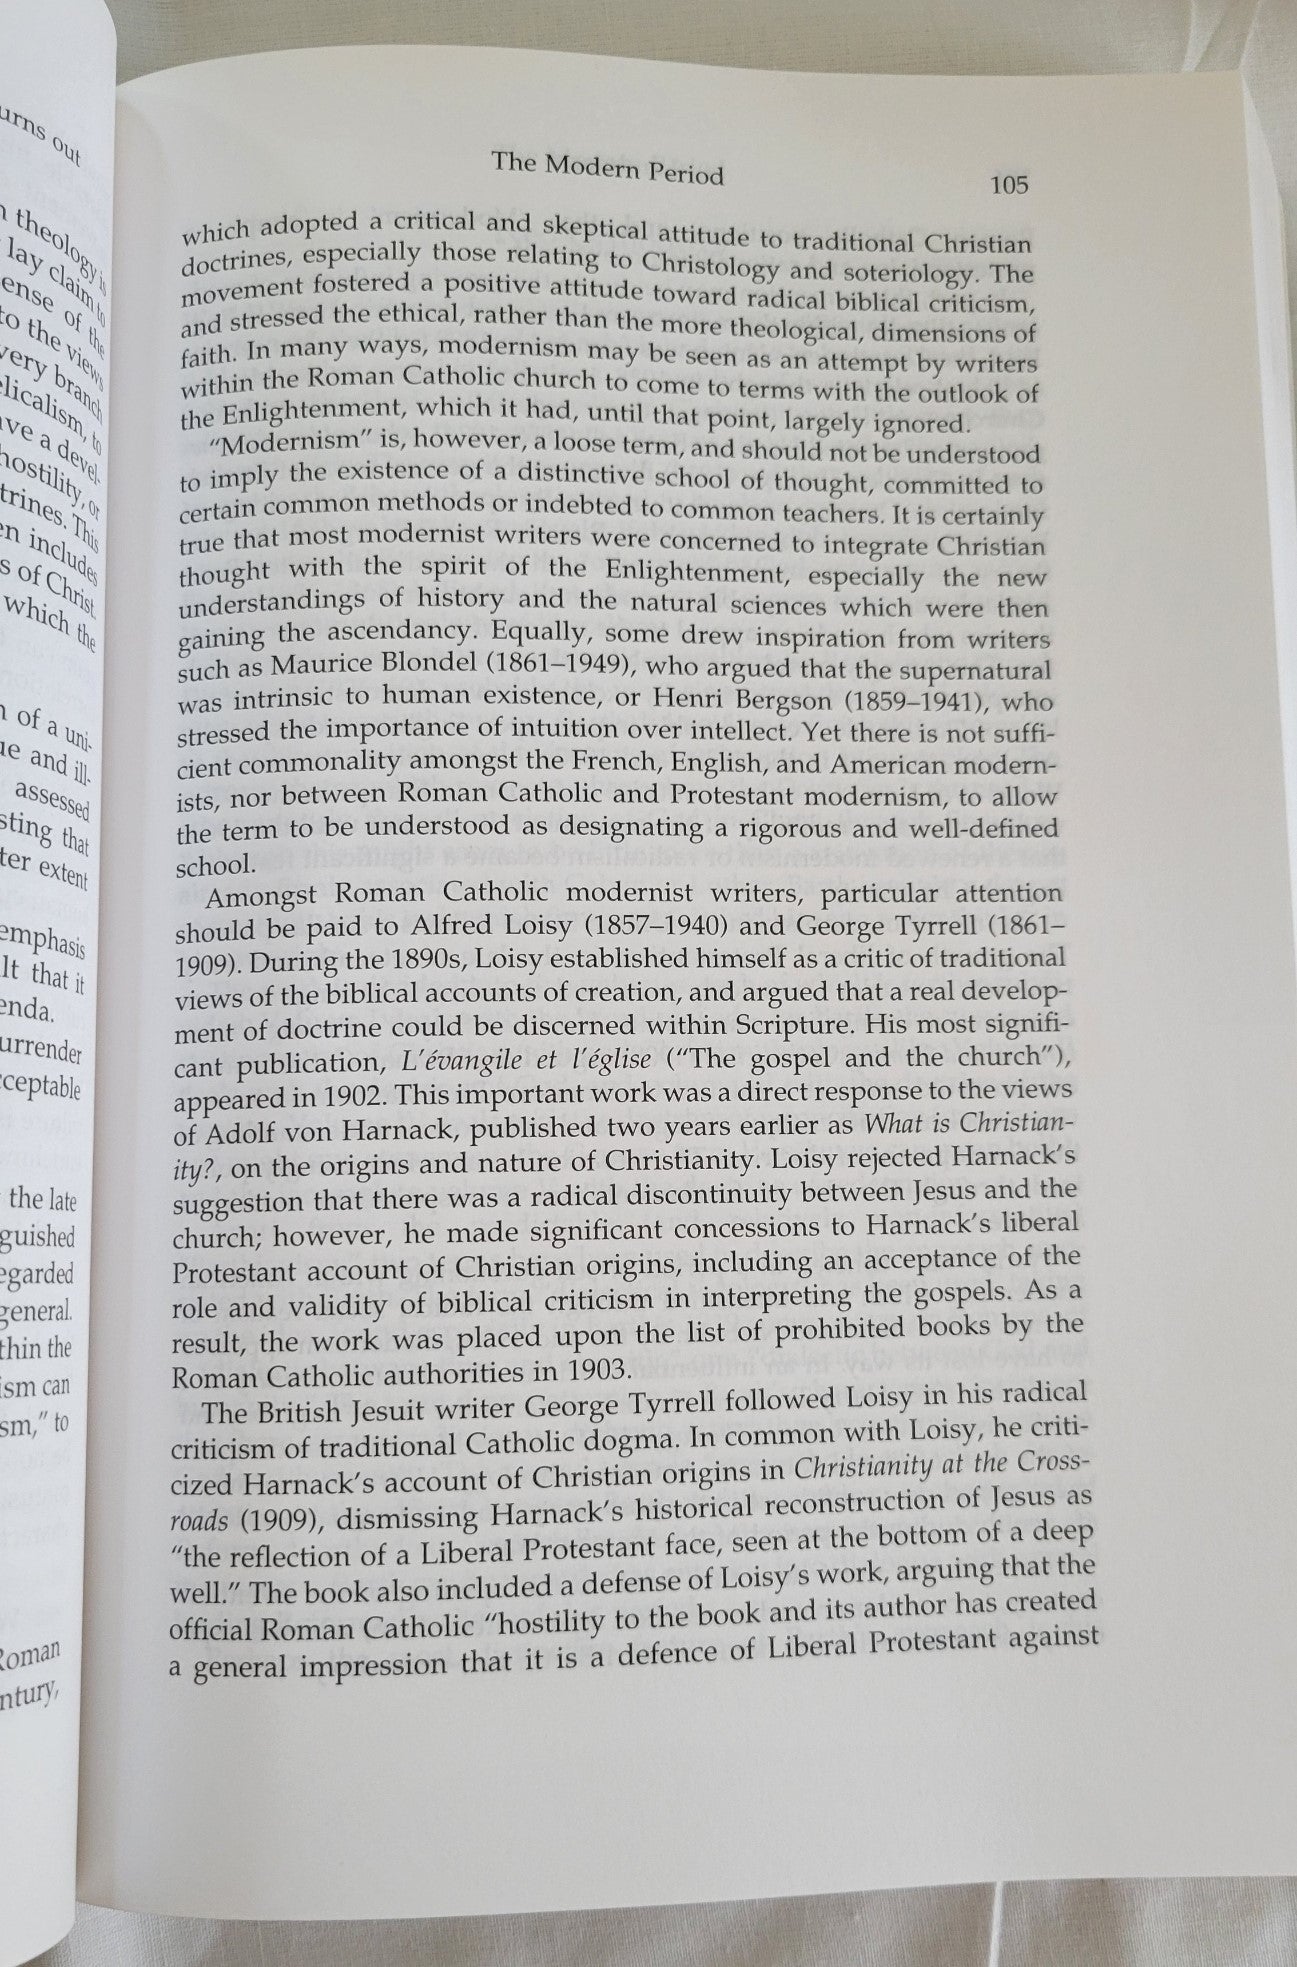 Used book. Christian Theology: An Introduction, Second Edition written by Alister McGrath, published by Blackwell Publishers.  View of page 105